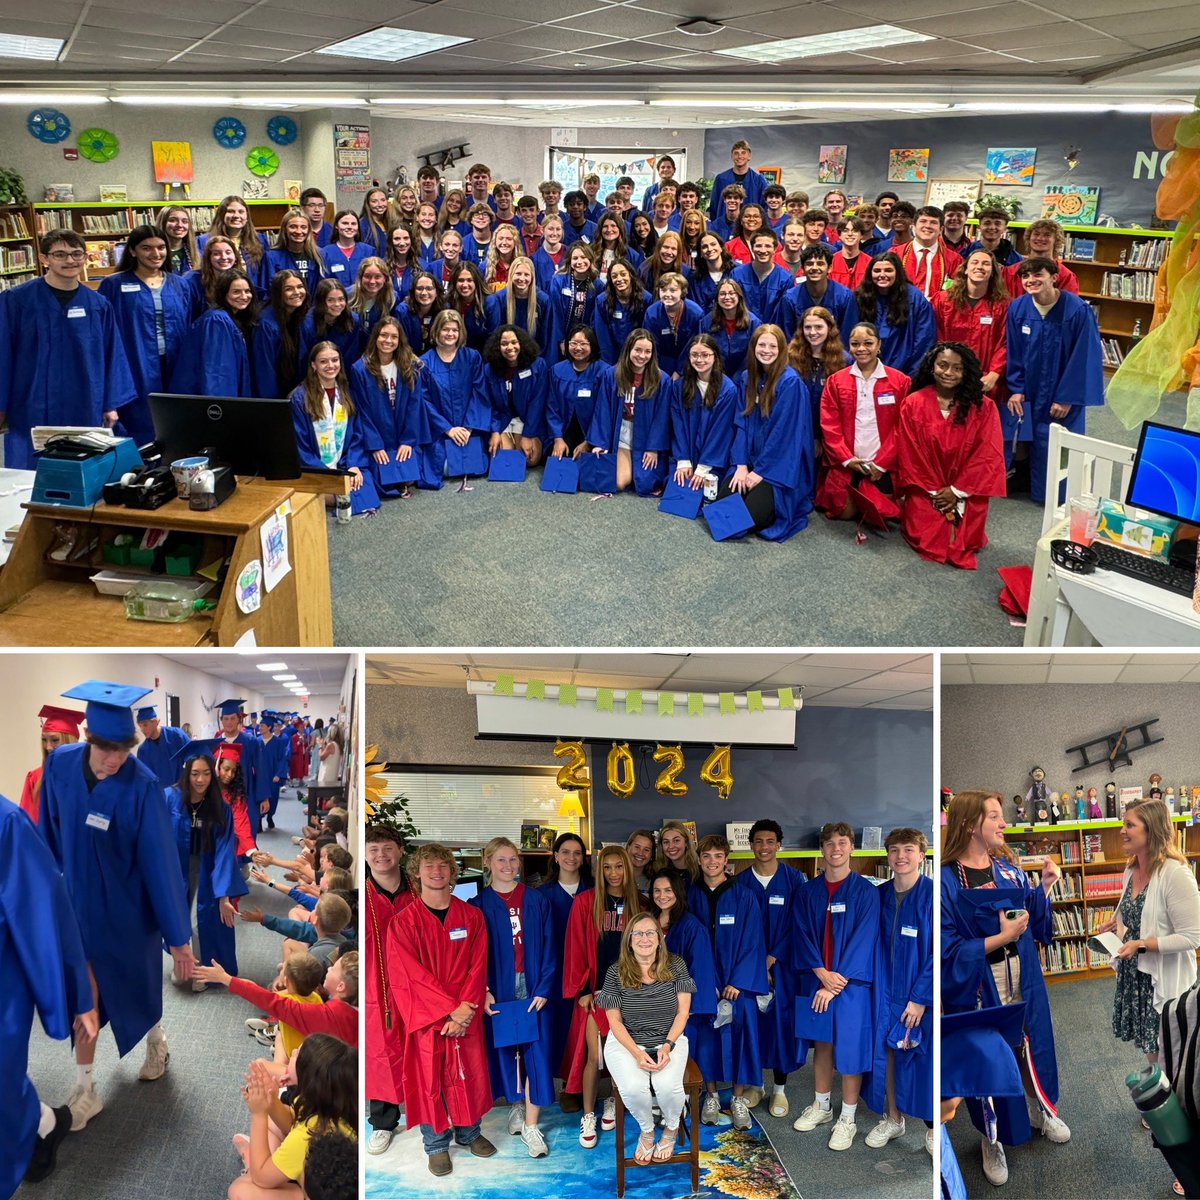 #YES, Senior Celebration is a favorite #FCEfish day @FCEhse!  Even previous Ts come back for it! We mingle, take class pics, walk the halls with current Ss, and then grab a muffin on the way back to high school. 🎉 
Congrats graduates @HSESchools! 🎓
@UrbanJason🐯@HSEPrincipal 🦁